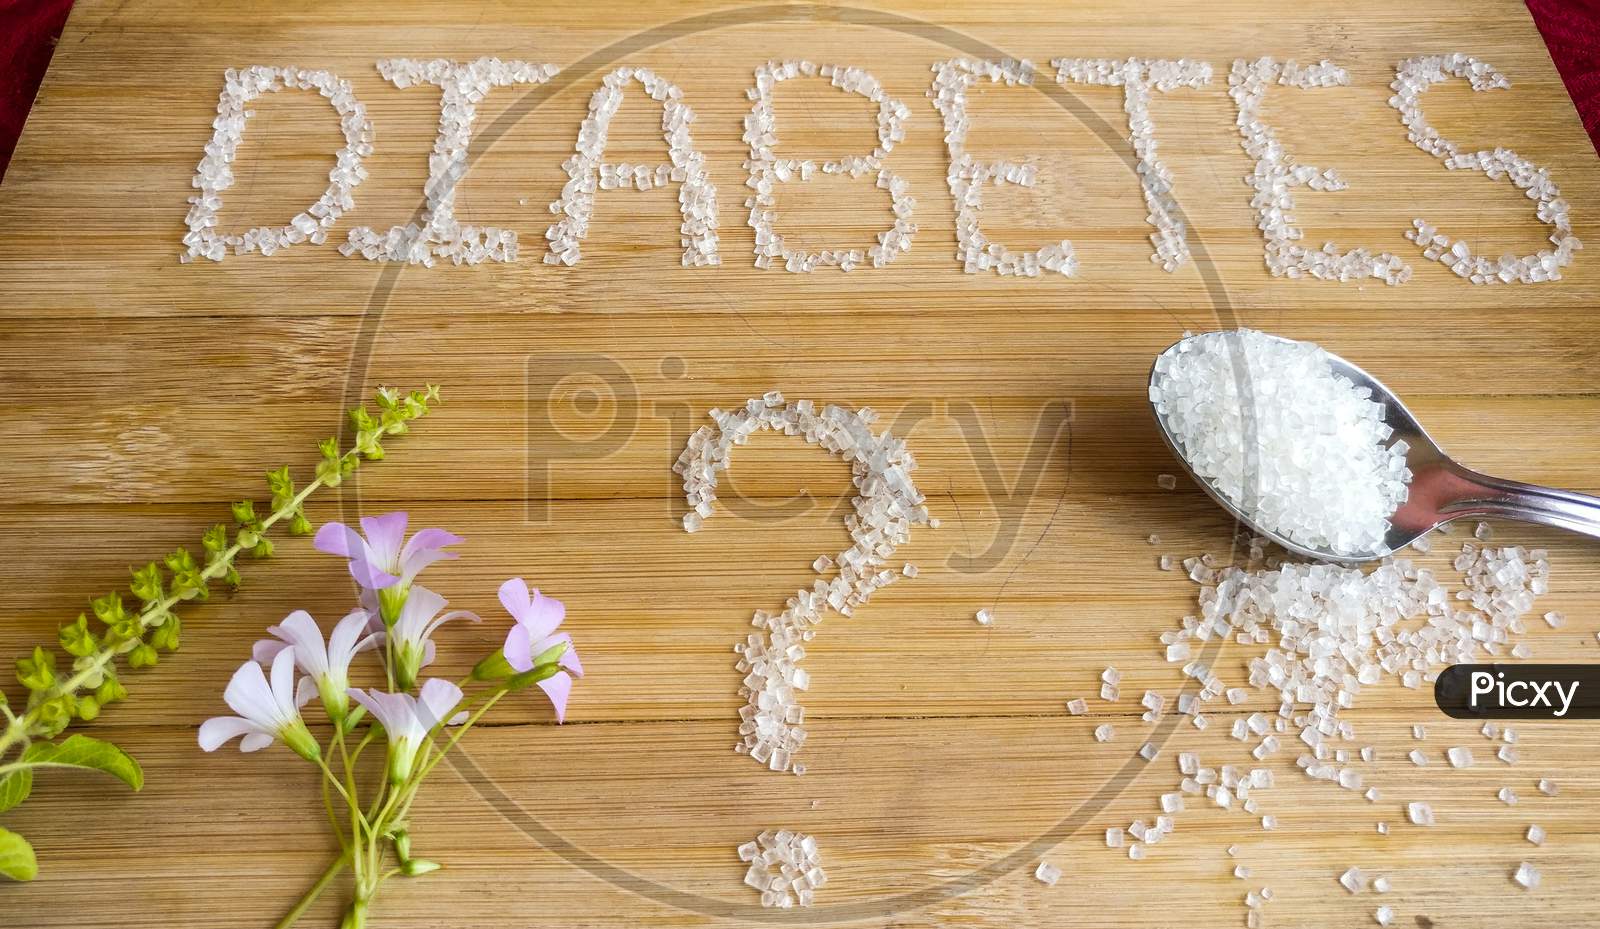 Diabetes written on the wooden table giving massage stay healthy.used Basil, spoon of sugar, flowers, wooden table